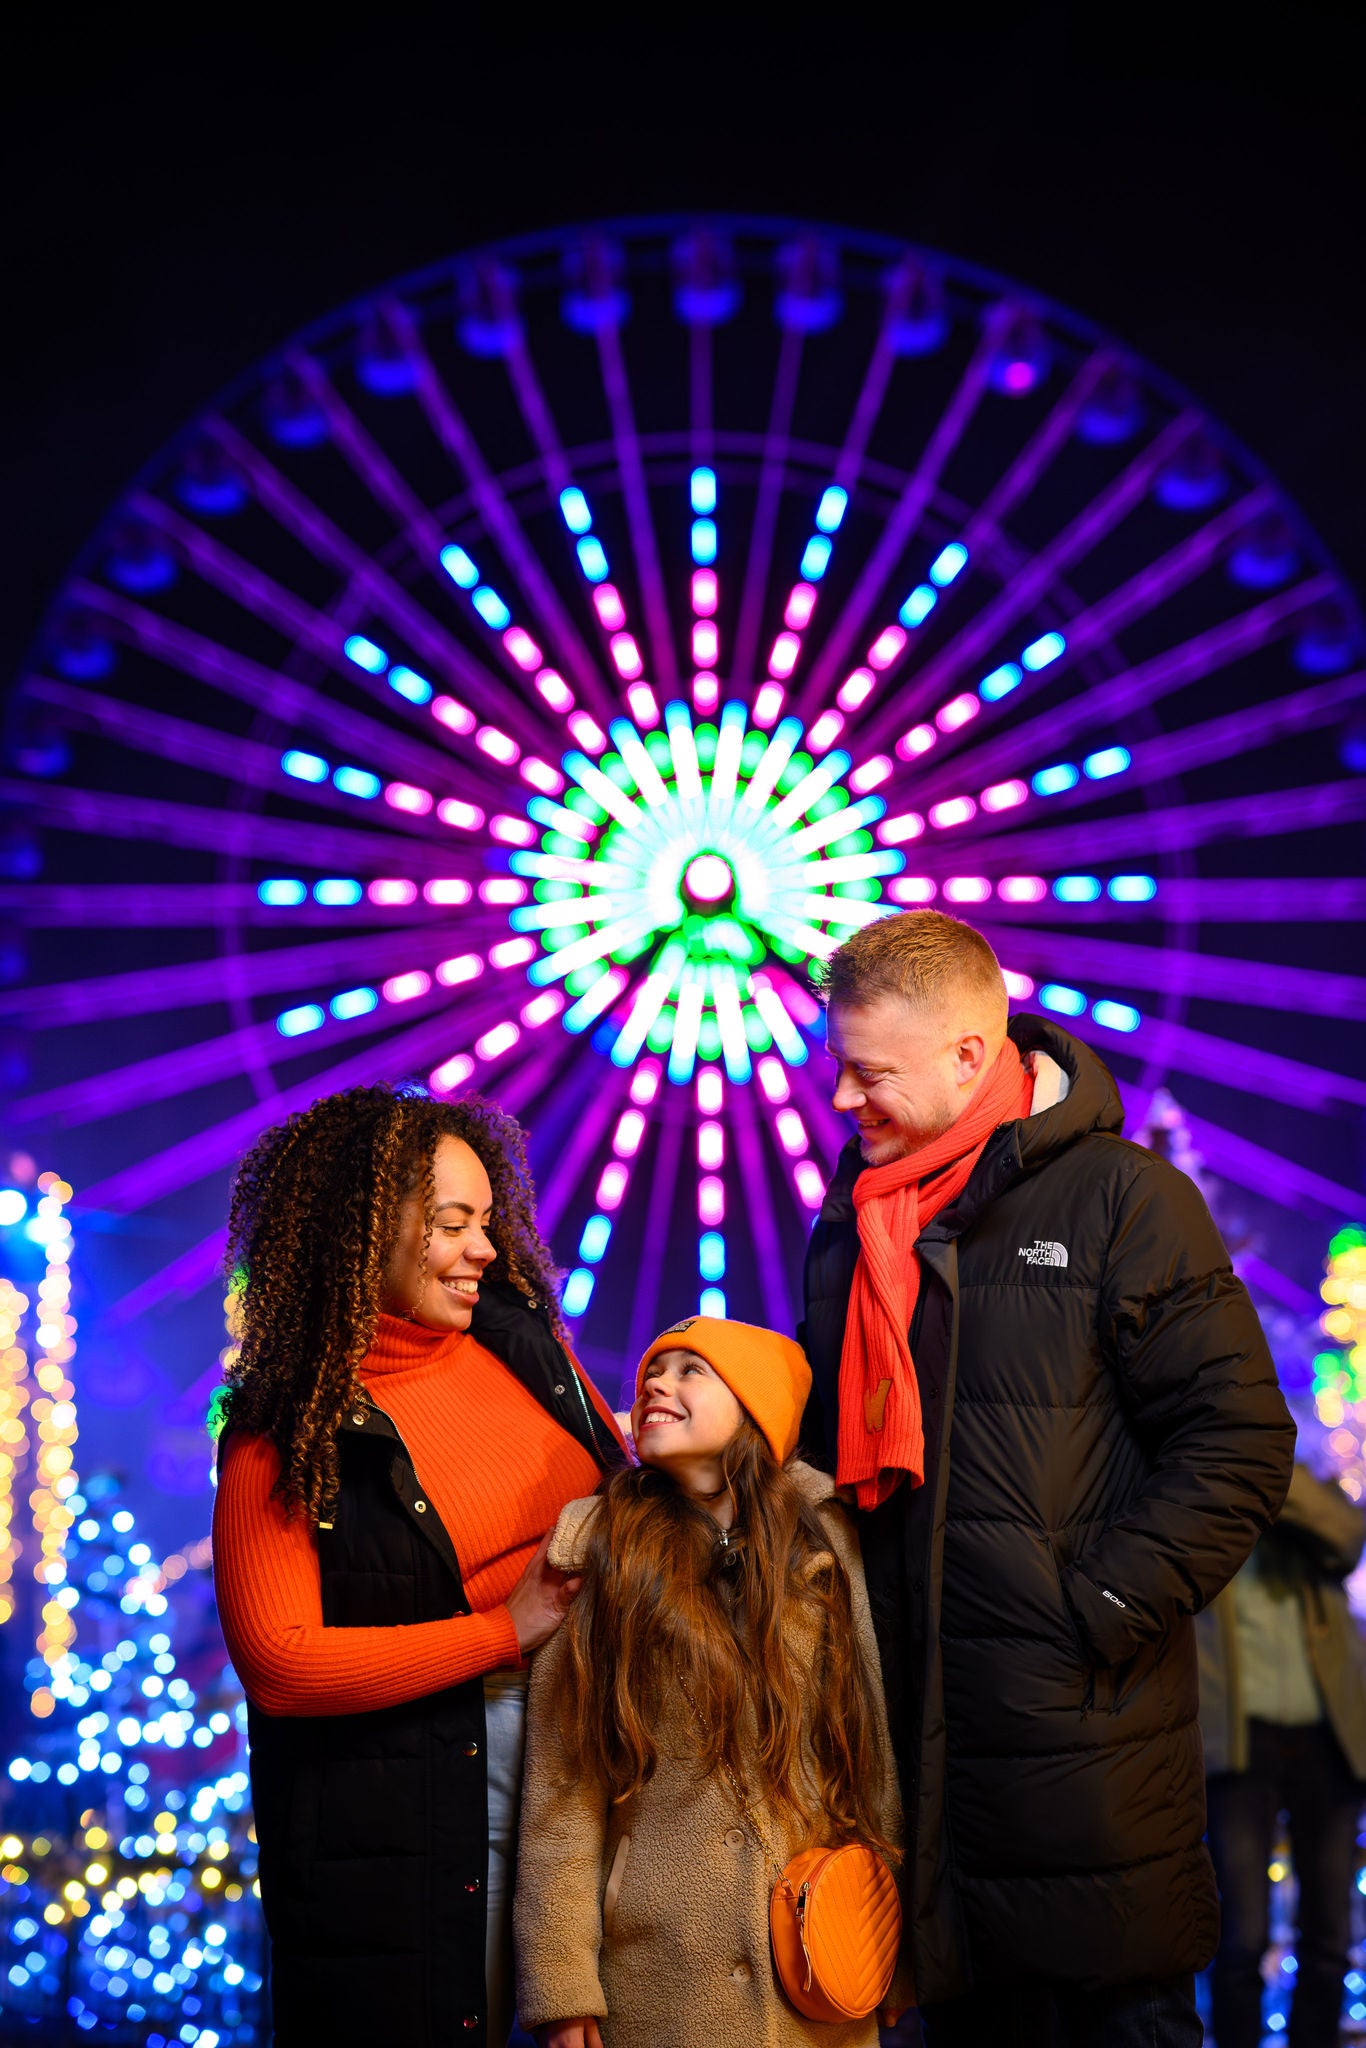 Experience the christmas spirit during Bright Nights!